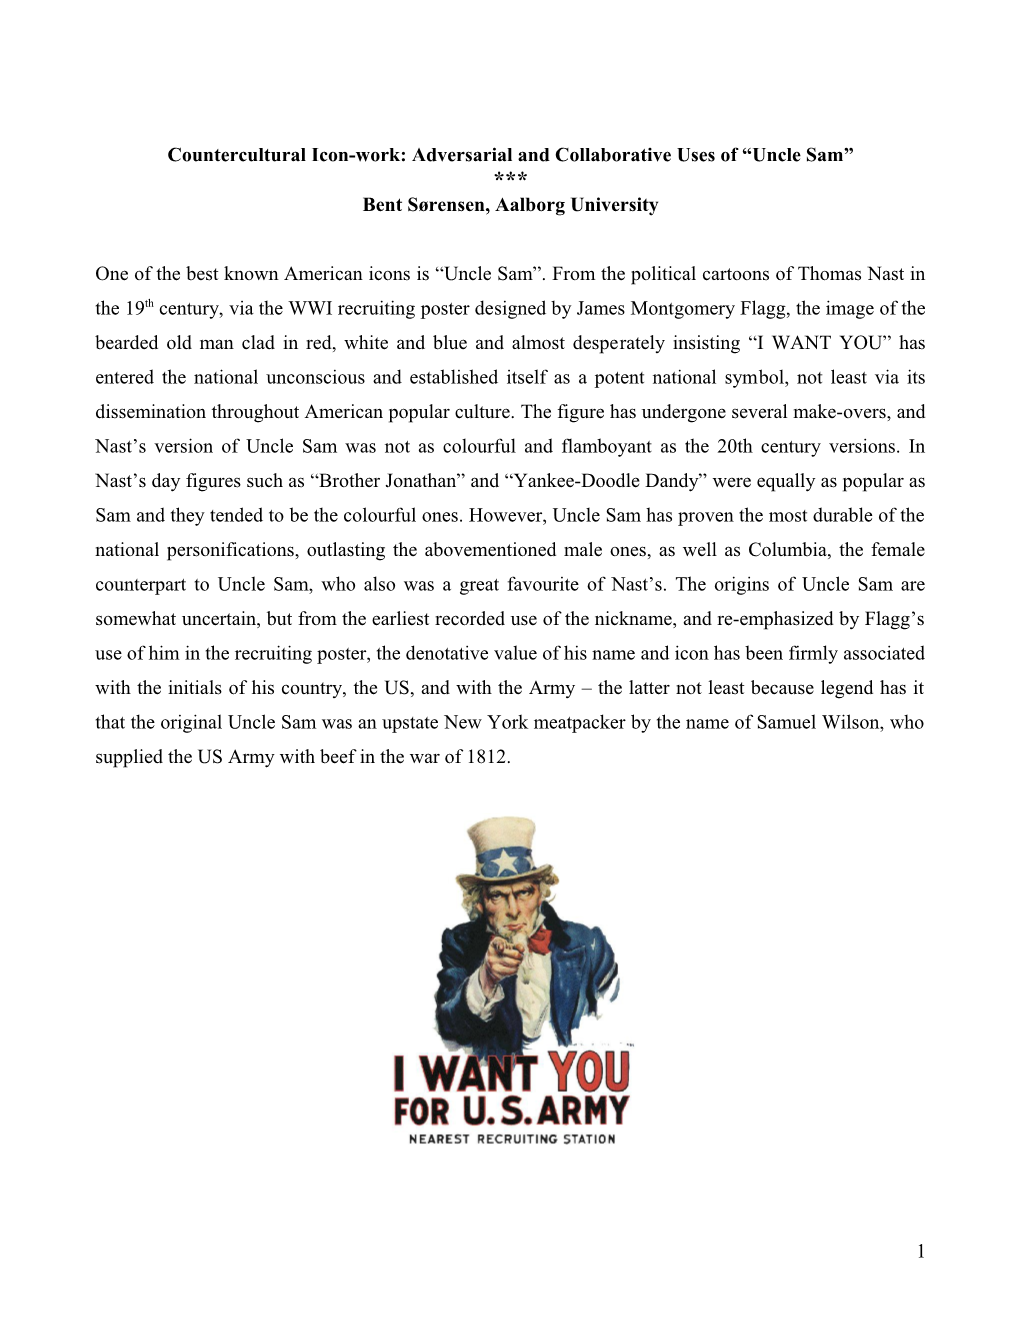 Countercultural Icon-Work: Adversarial and Collaborative Uses of Uncle Sam